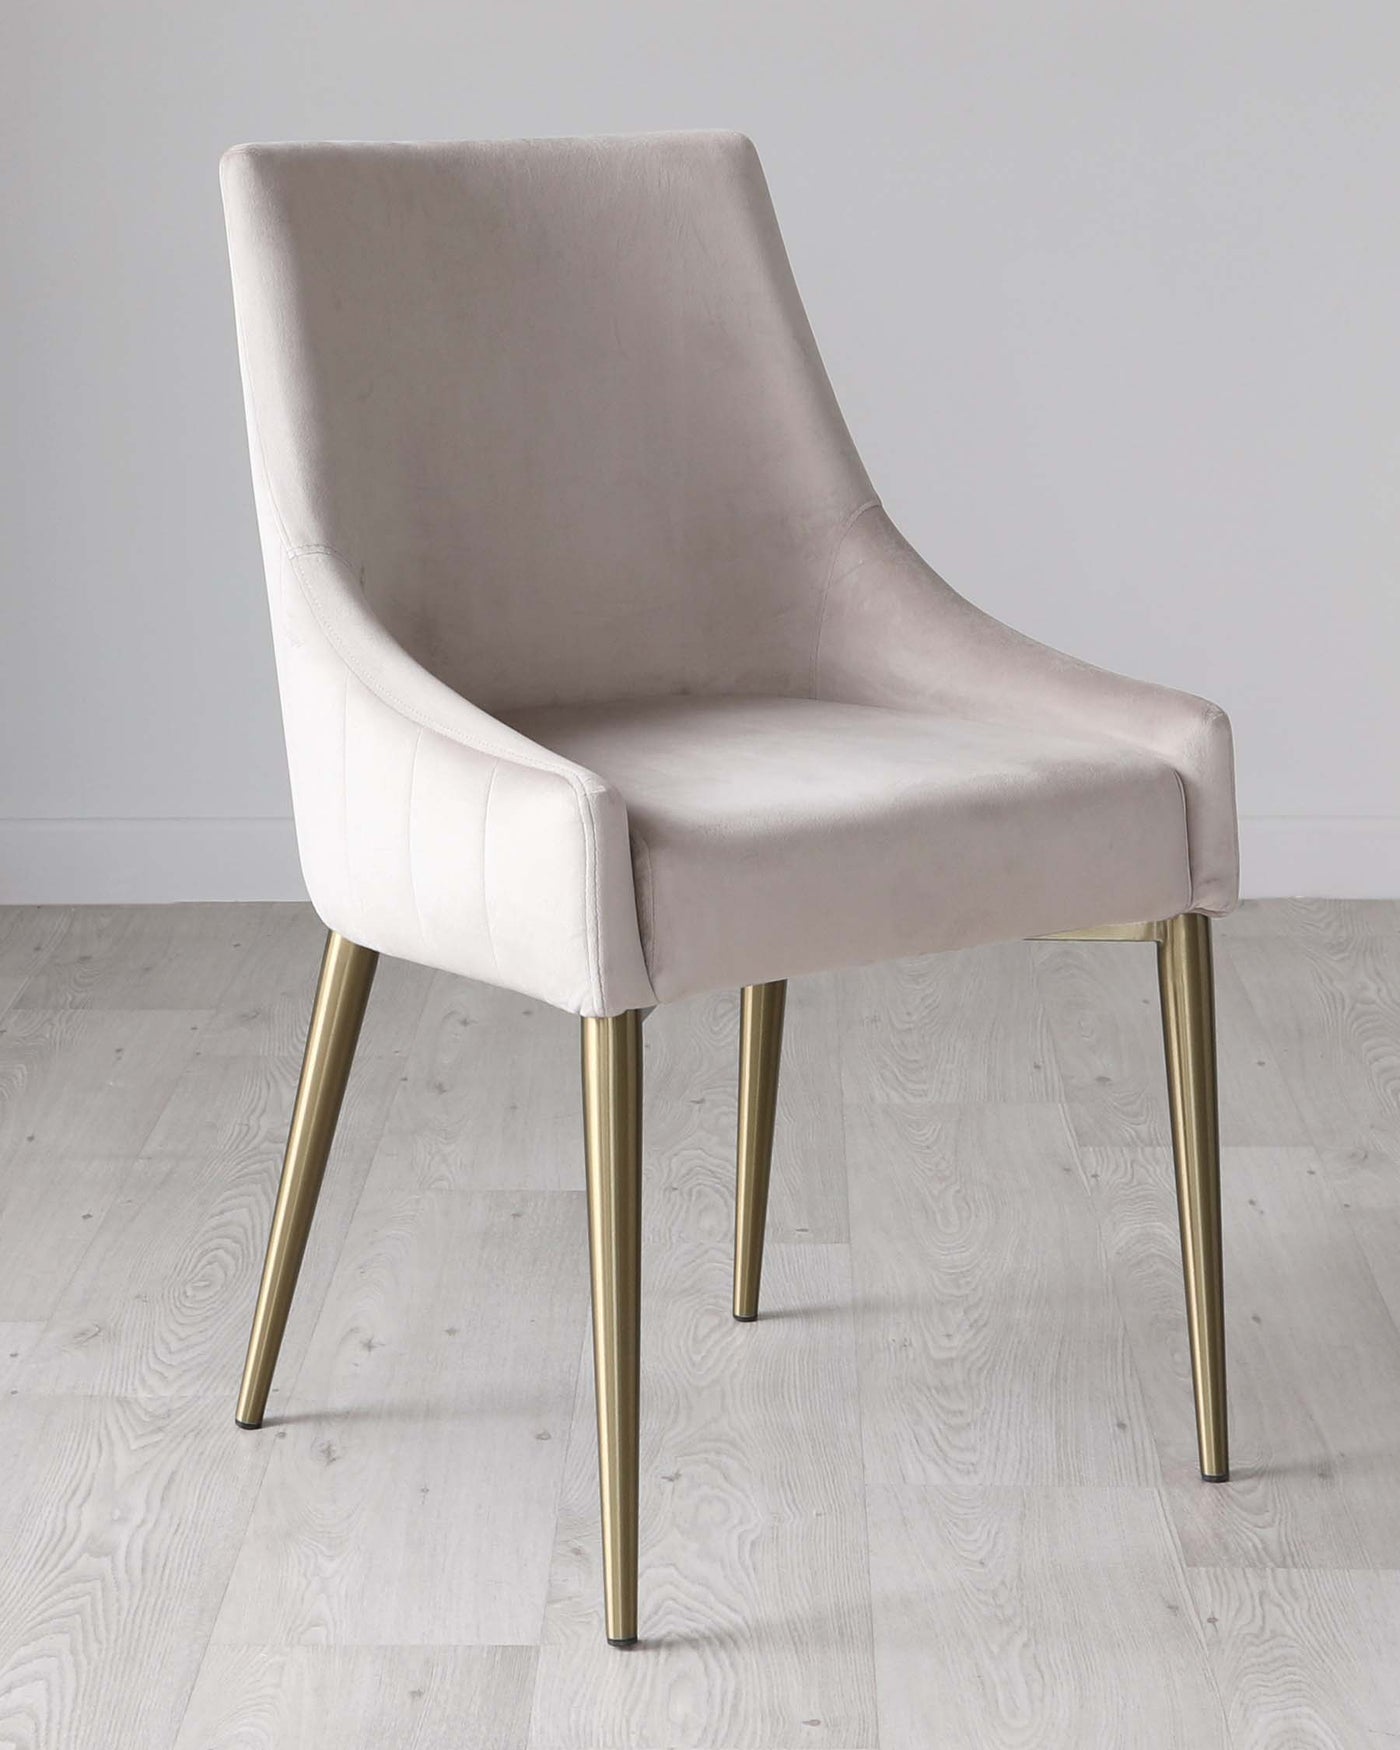 Elegant modern dining chair with a soft velvety beige upholstery and vertical stitching on the backrest, featuring sleek tapered metal legs in a brushed gold finish.